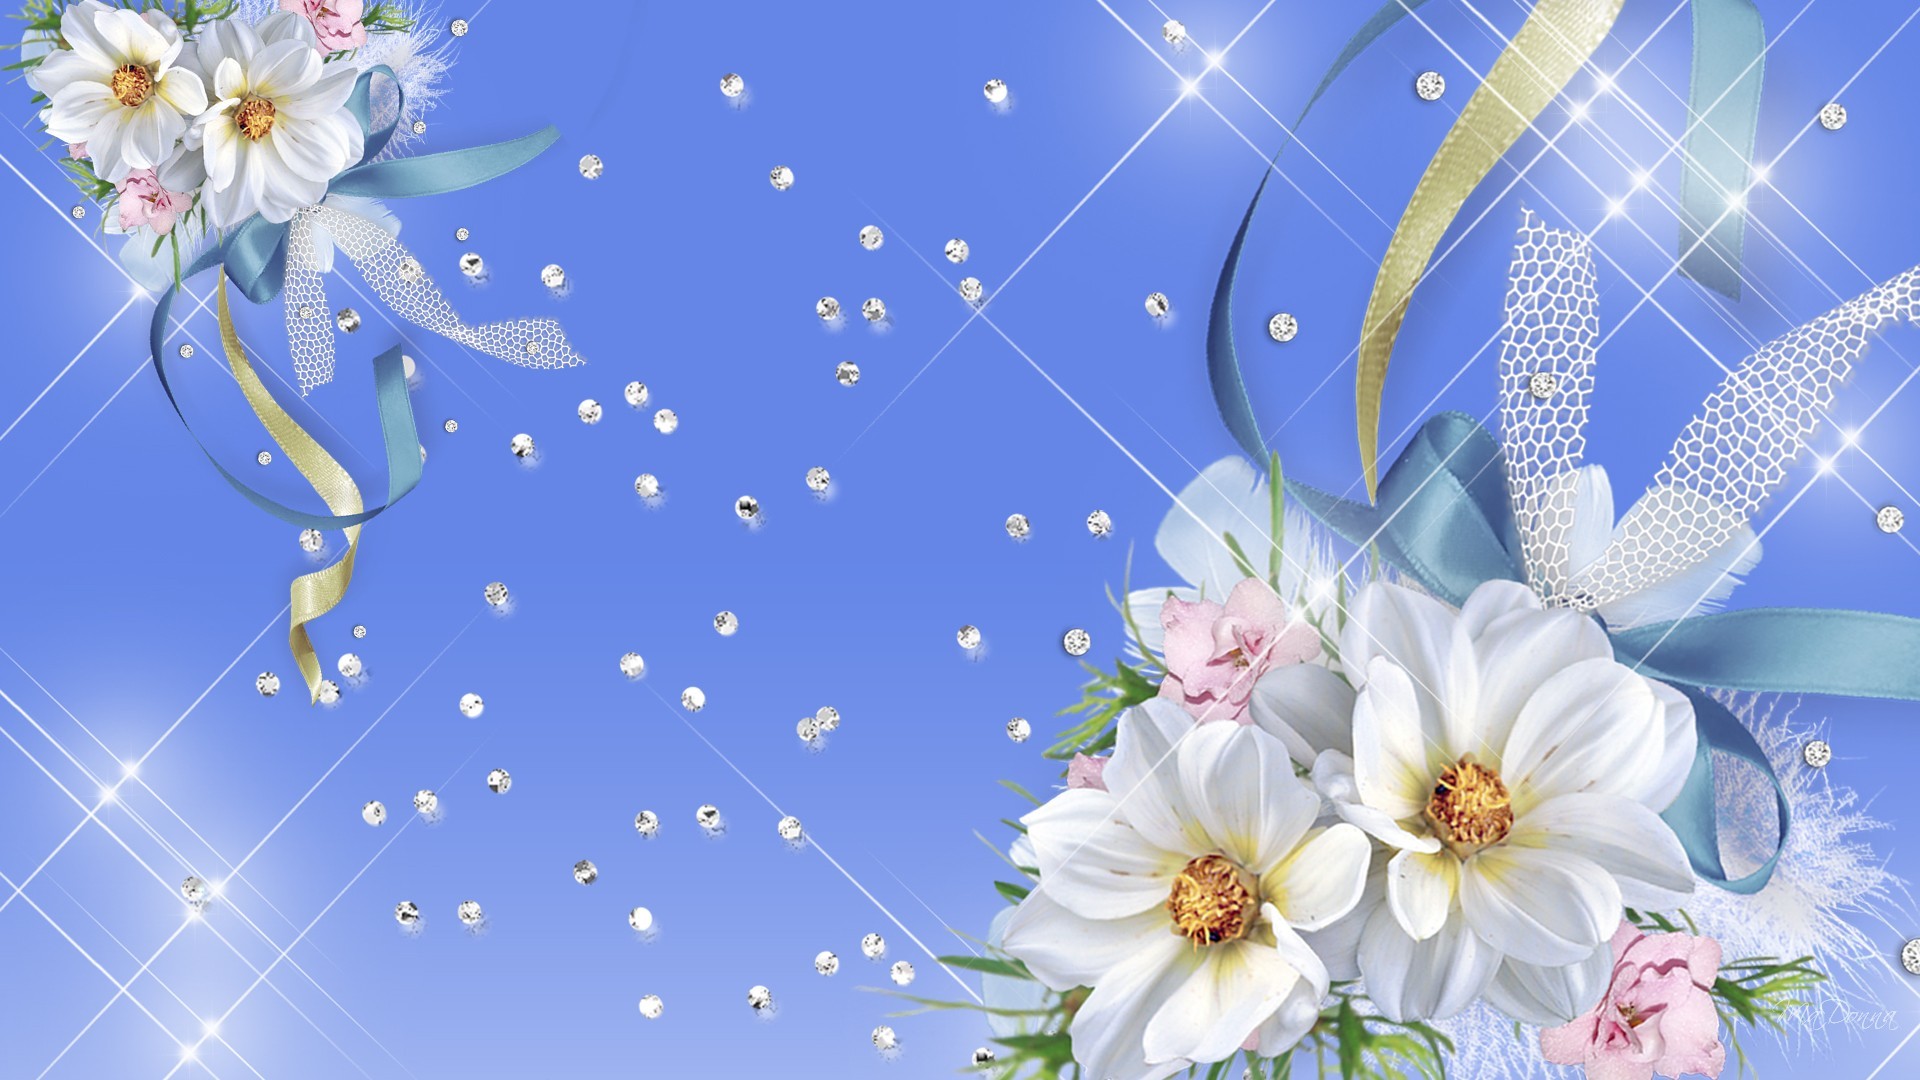 1920x1080 Blue And White Flower Wallpaper 7 Wide Wallpaper